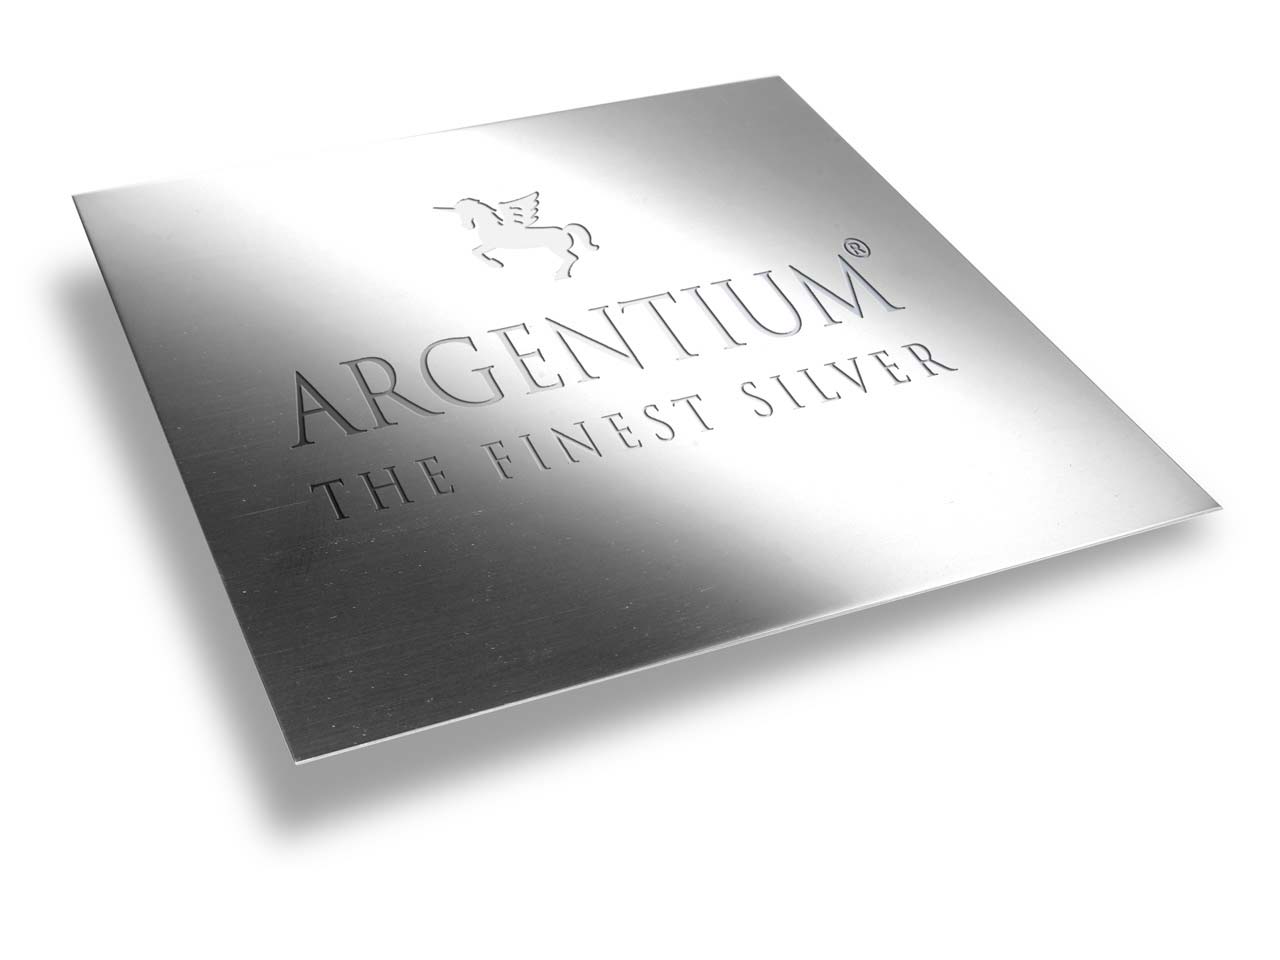 Does Argentium have the same 92.5% silver purity as traditional Sterling silver?